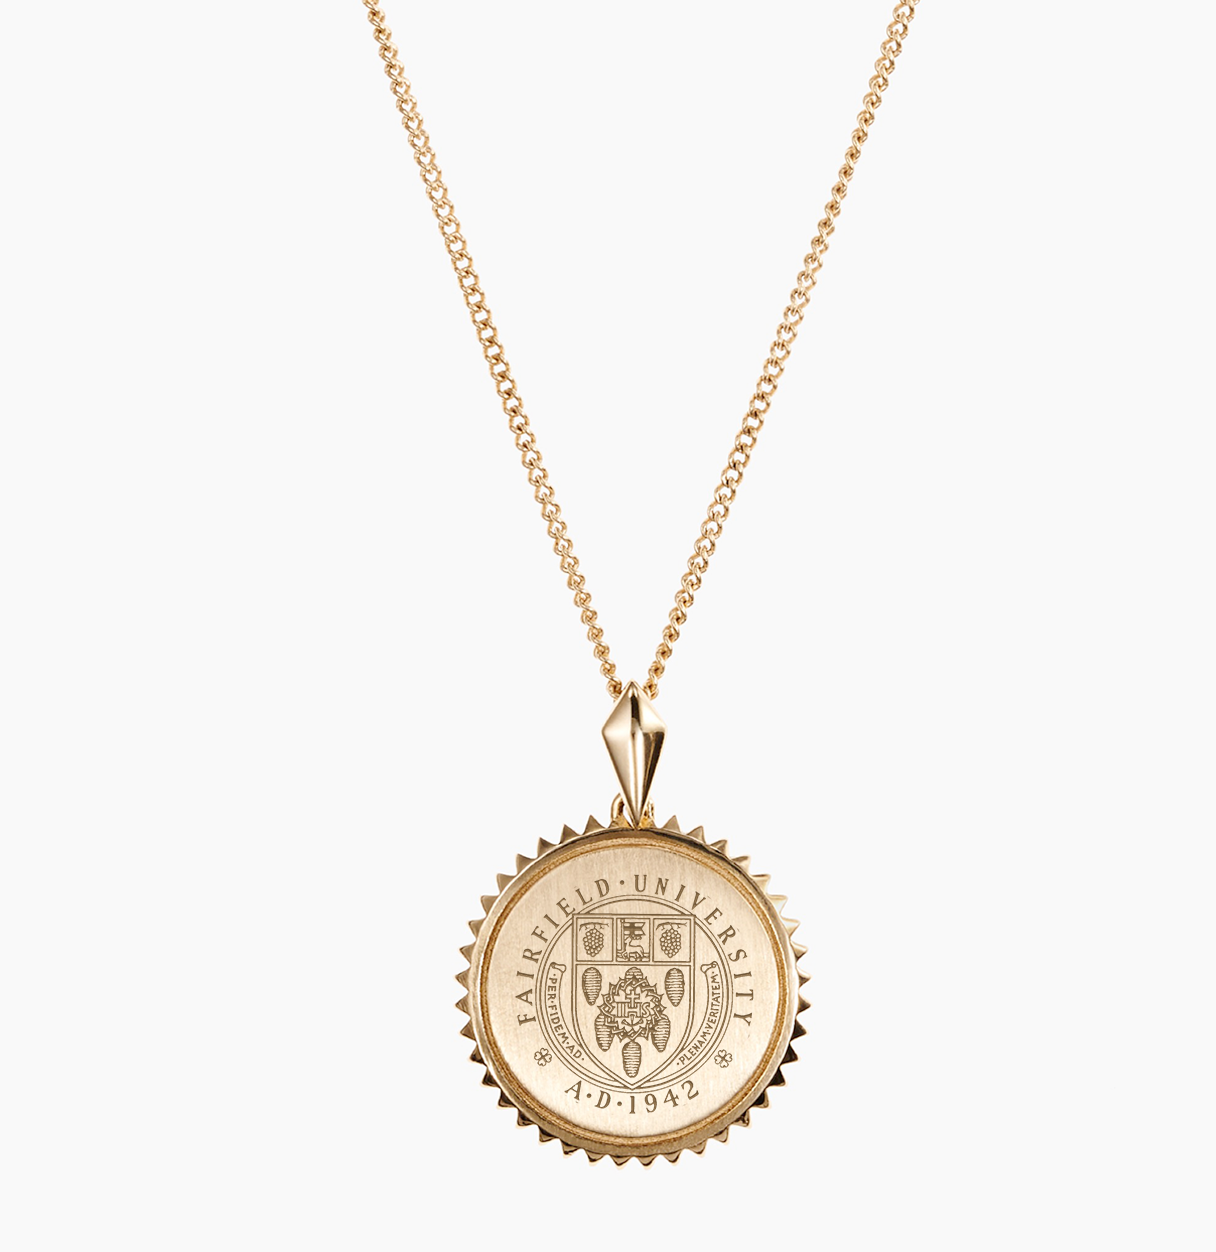 Fairfield Sunburst Necklace with Cable Chain